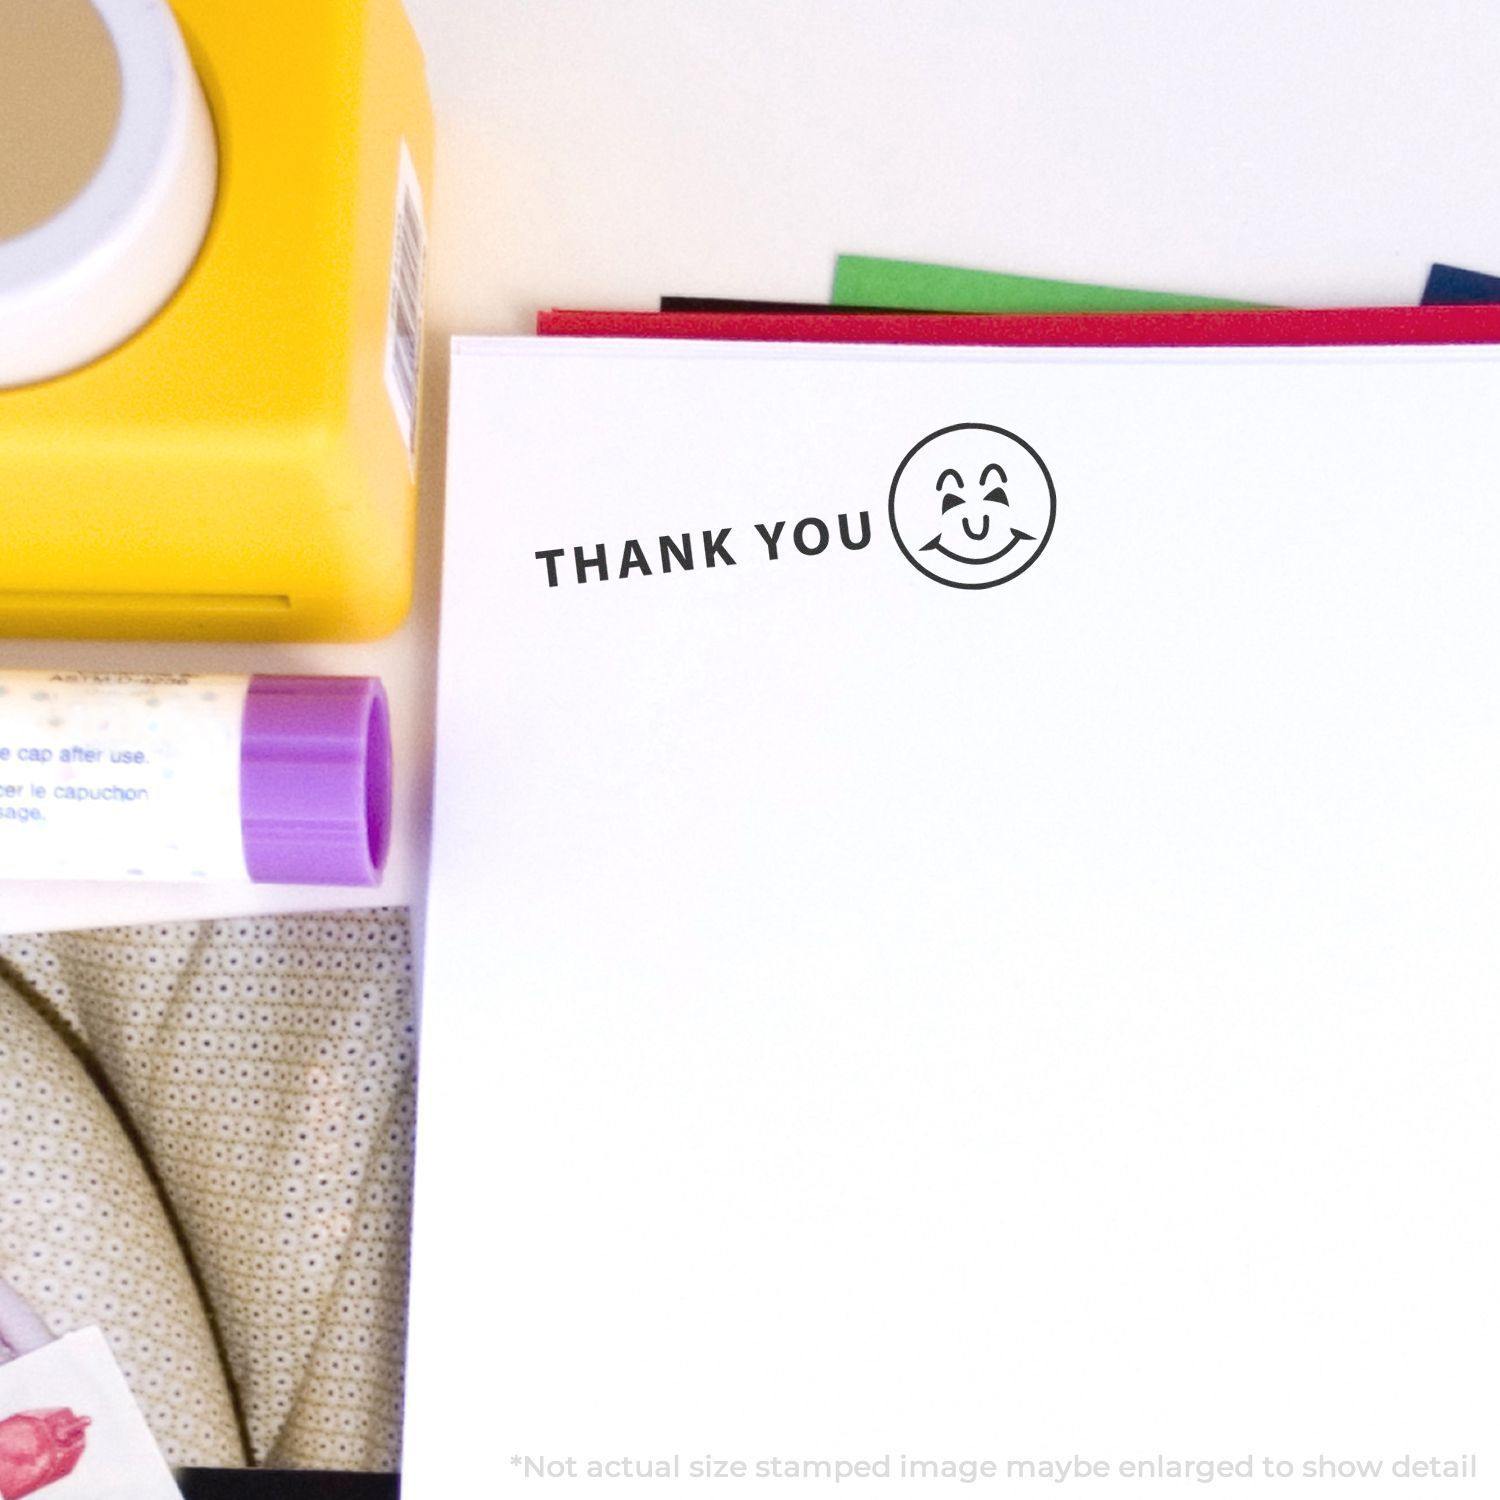 A self-inking stamp with a stamped image showing how the text "THANK YOU" with an image of a smiley on the right is displayed after stamping.